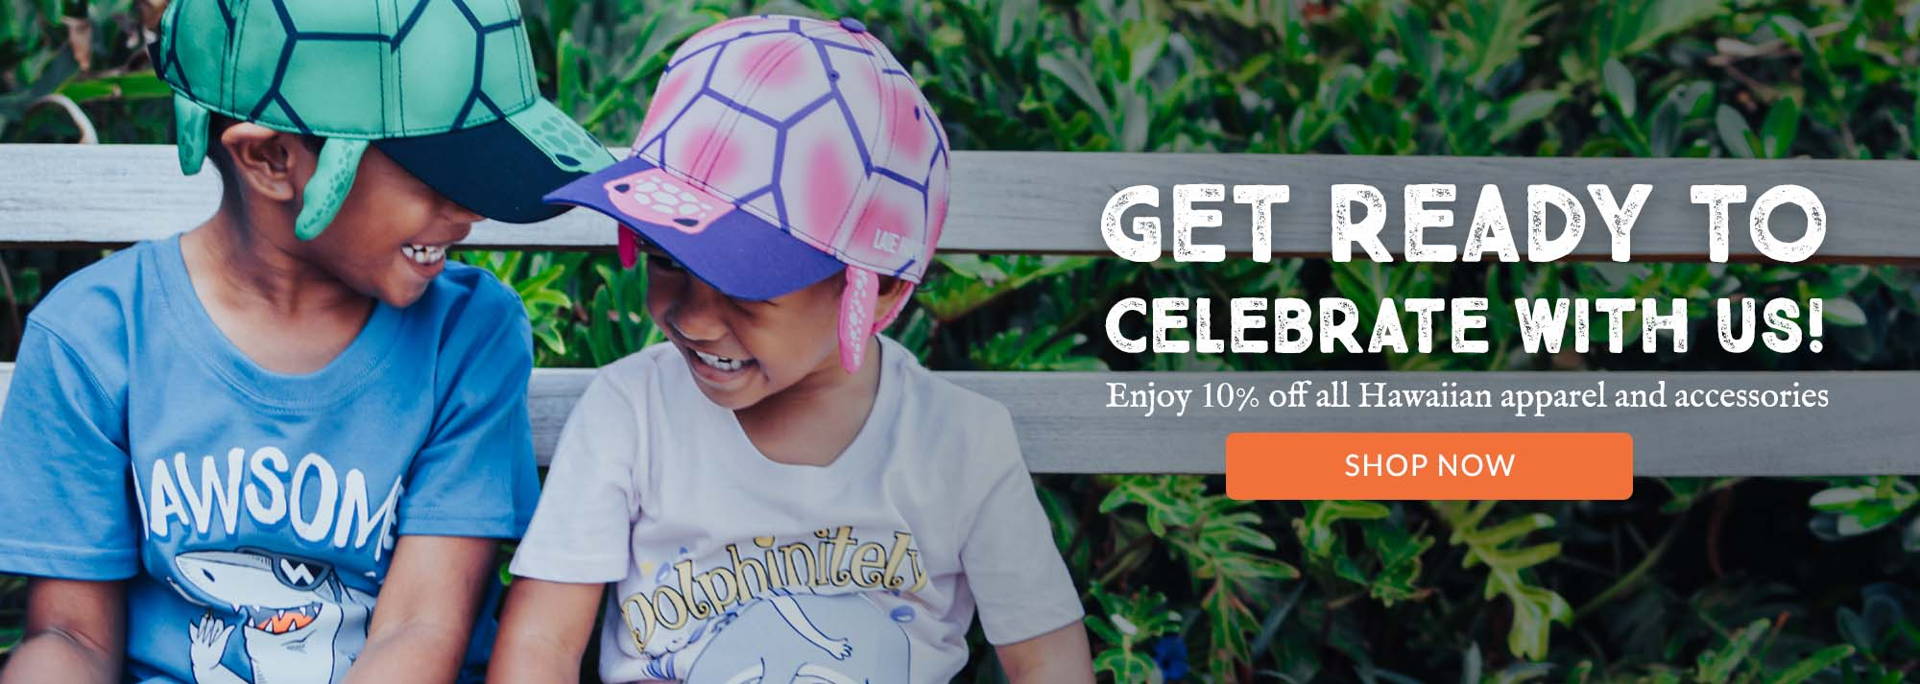 Get ready to celebrate with us! Enjoy 10% off all Hawaiian apparel and accessories as we countdown to Polynesian Cultural Center's 60th anniversary.